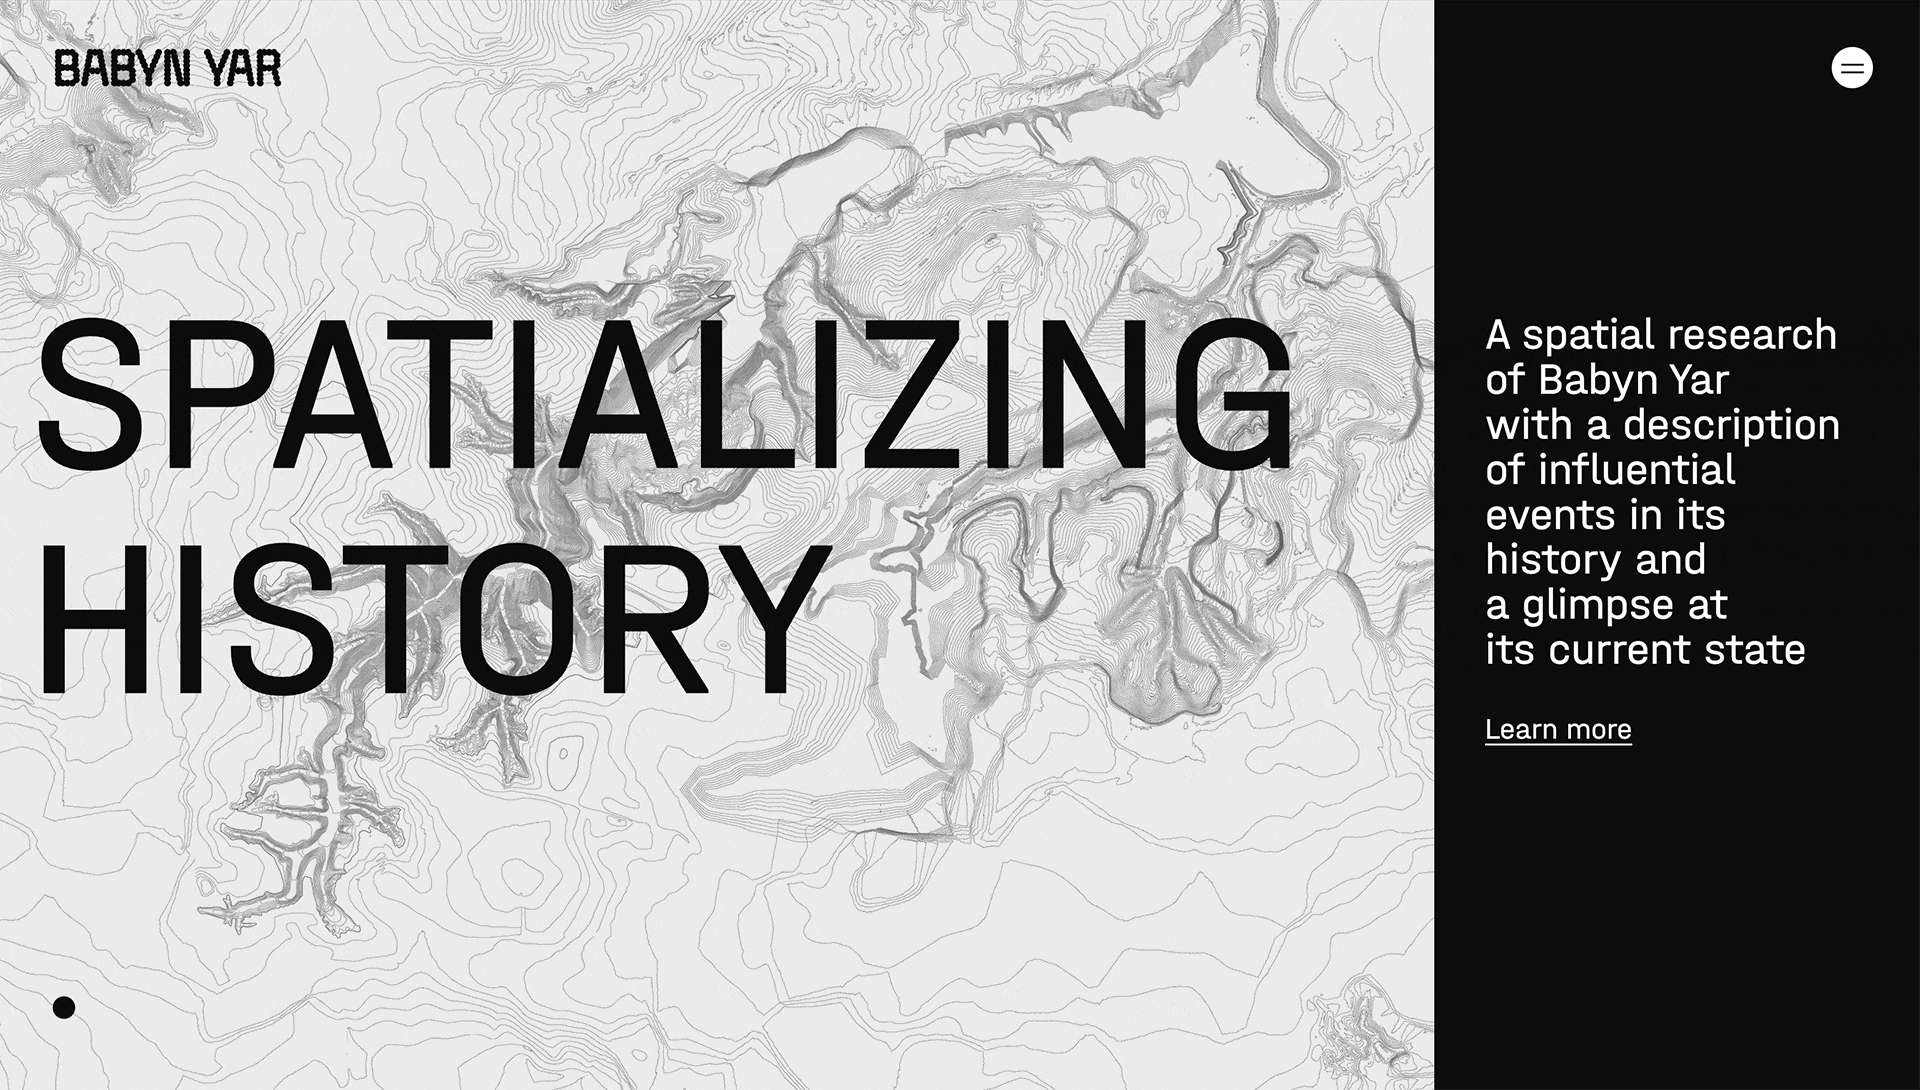 readymag blog: screenshots from “Spatializing History” by BYHMC